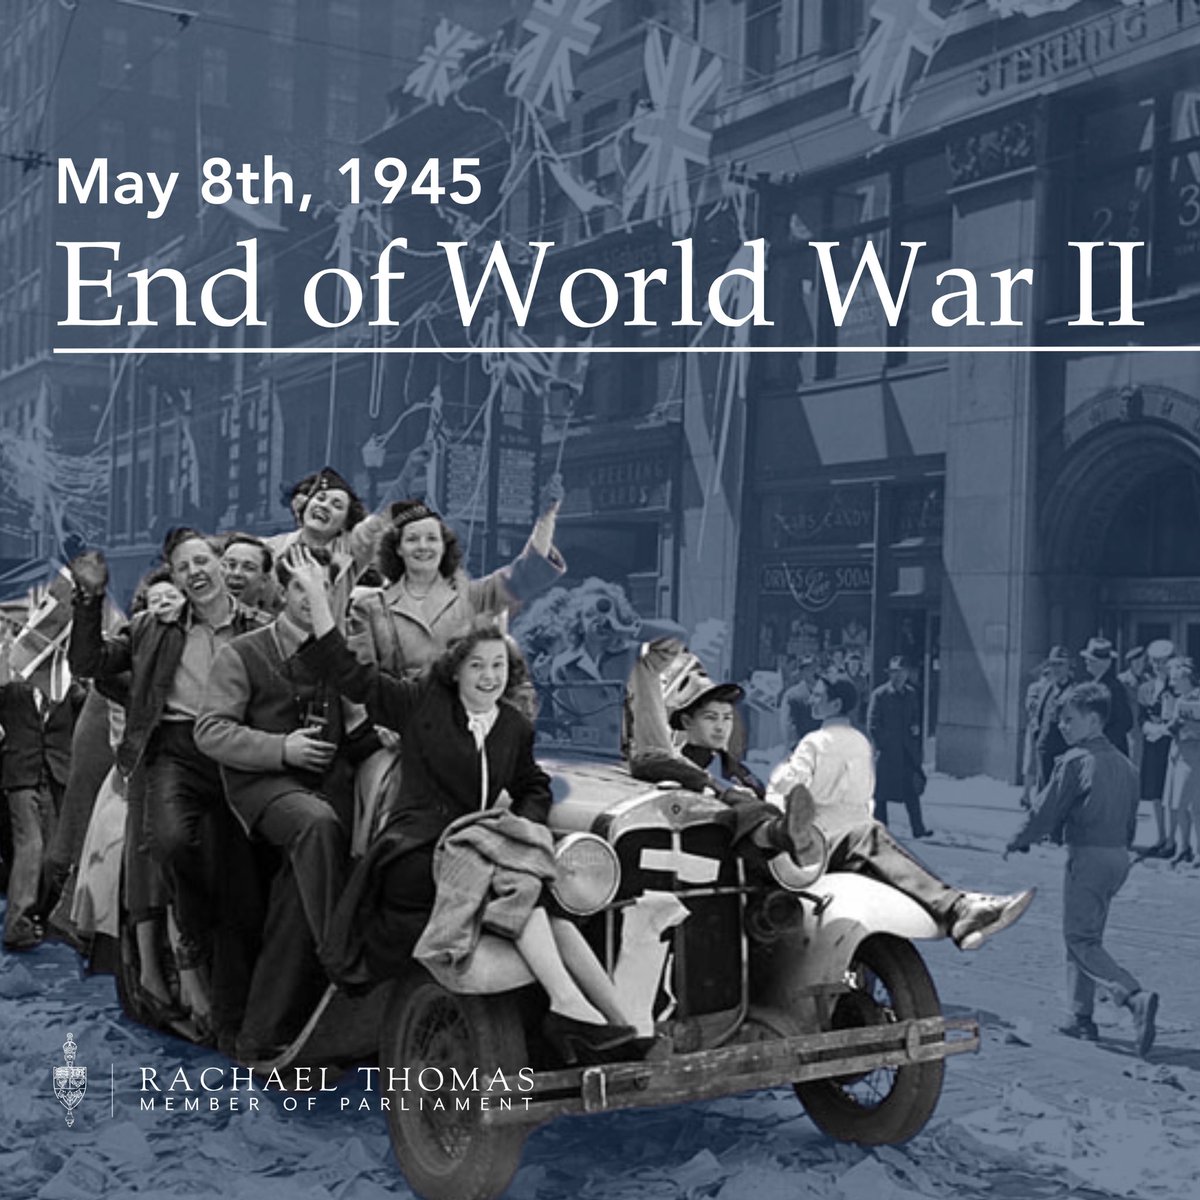 On May 8, 1945, the silence of peace replaced the jarring sounds of war. It signaled the end of WWII, and throughout Canada, in cities and towns, a war-weary nation celebrated with joy and relief. May we always contend for the freedom achieved by those who fought on our